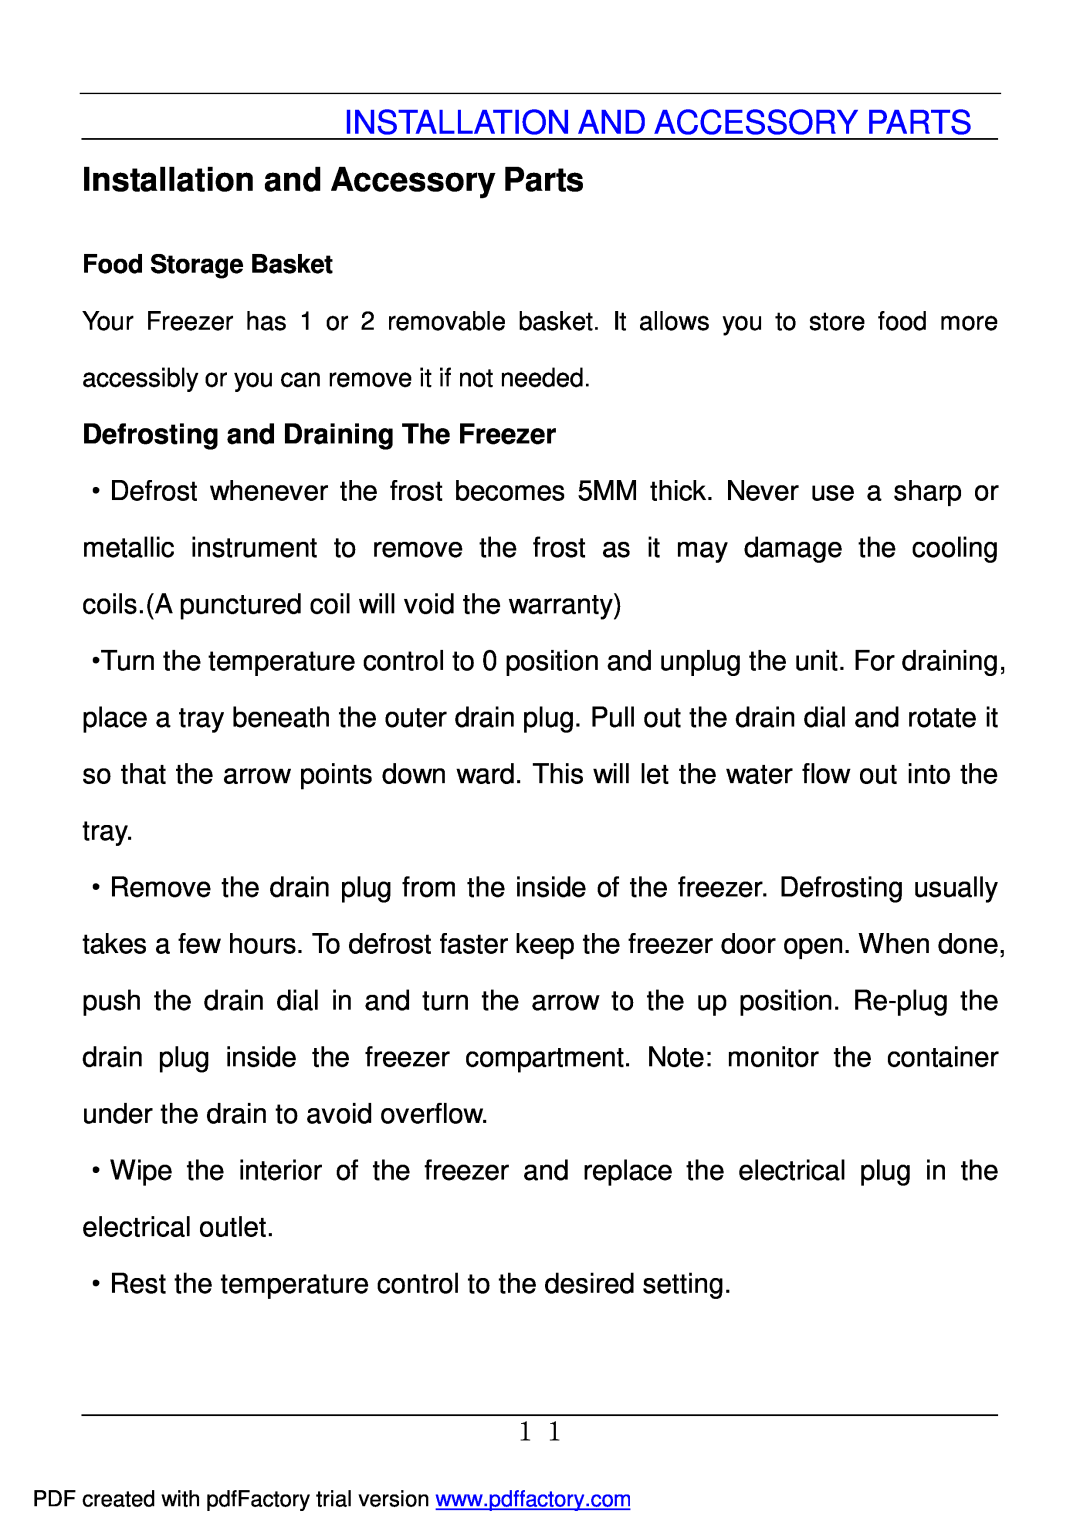 Haier BD-478A Installation And Accessory Parts, Installation and Accessory Parts, Defrosting and Draining The Freezer 